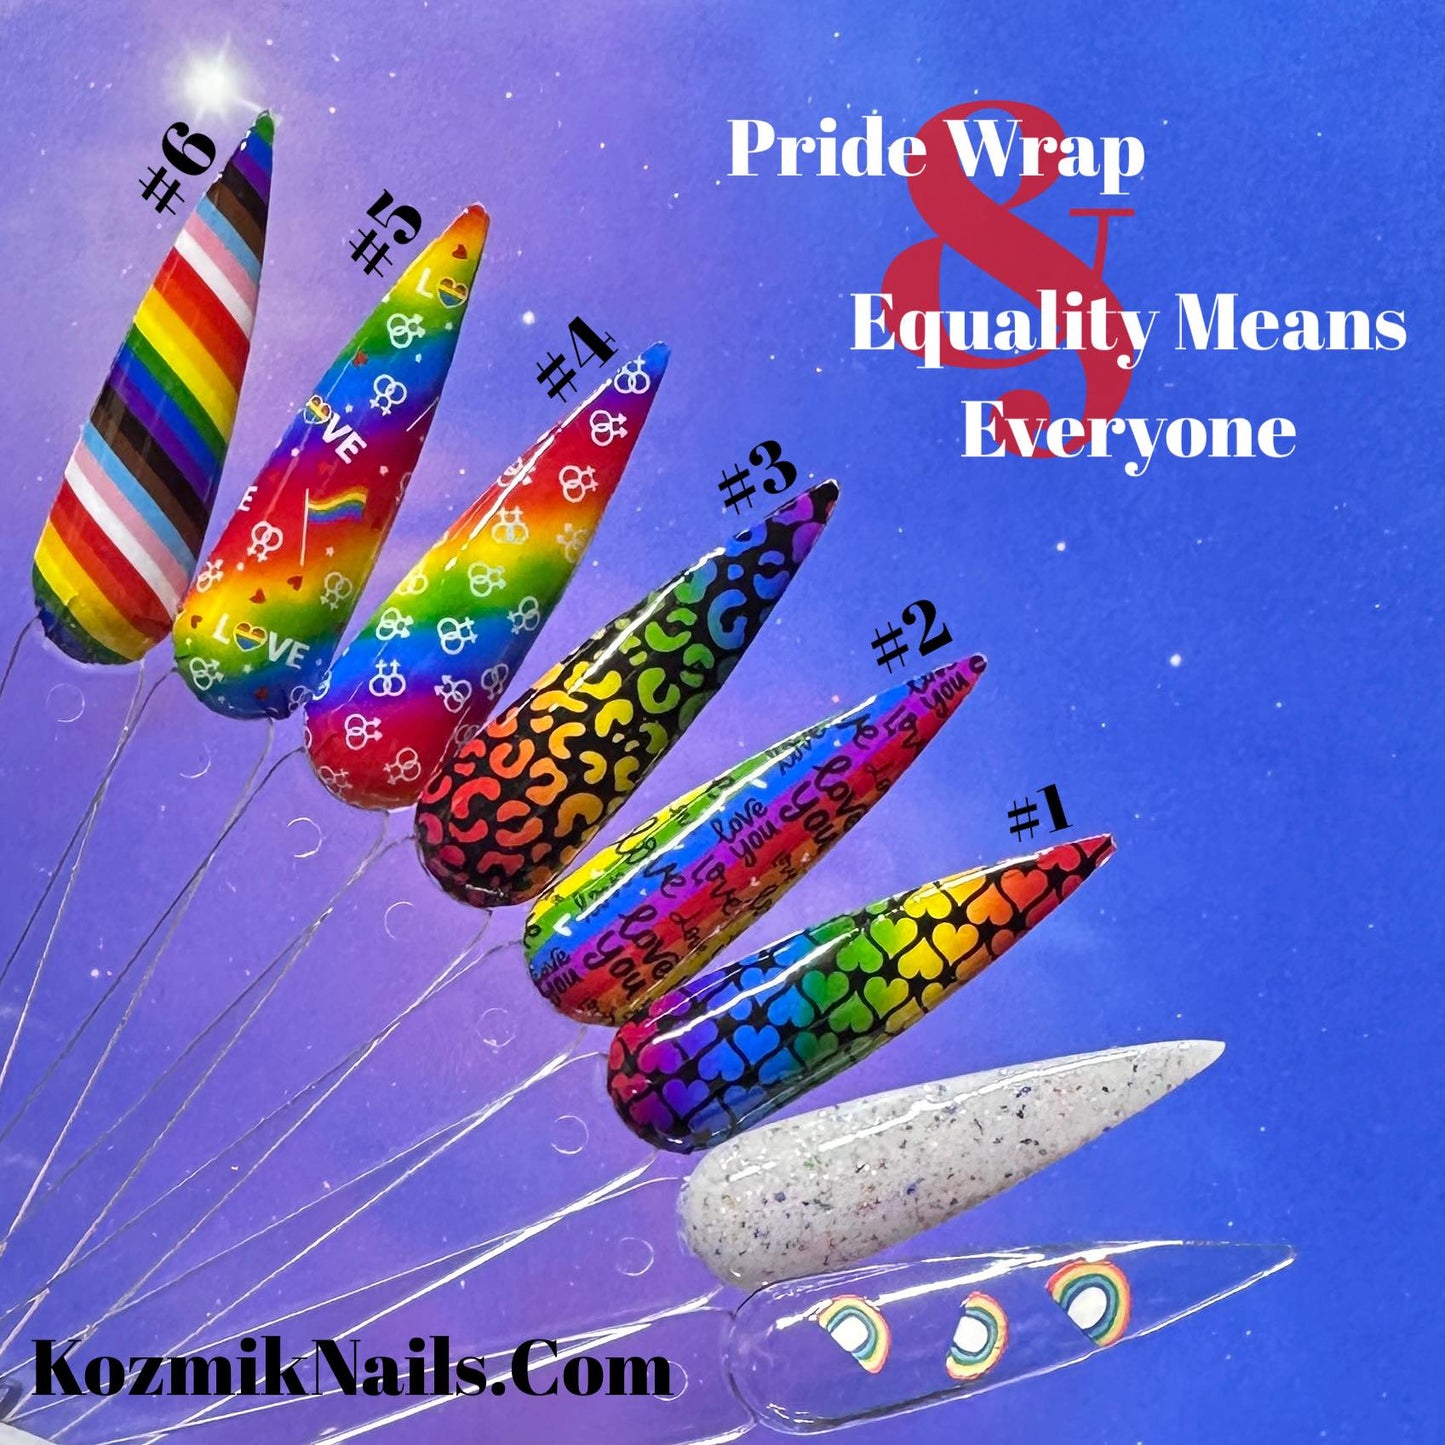 Equality Means Everyone & Pride Wrap Duo